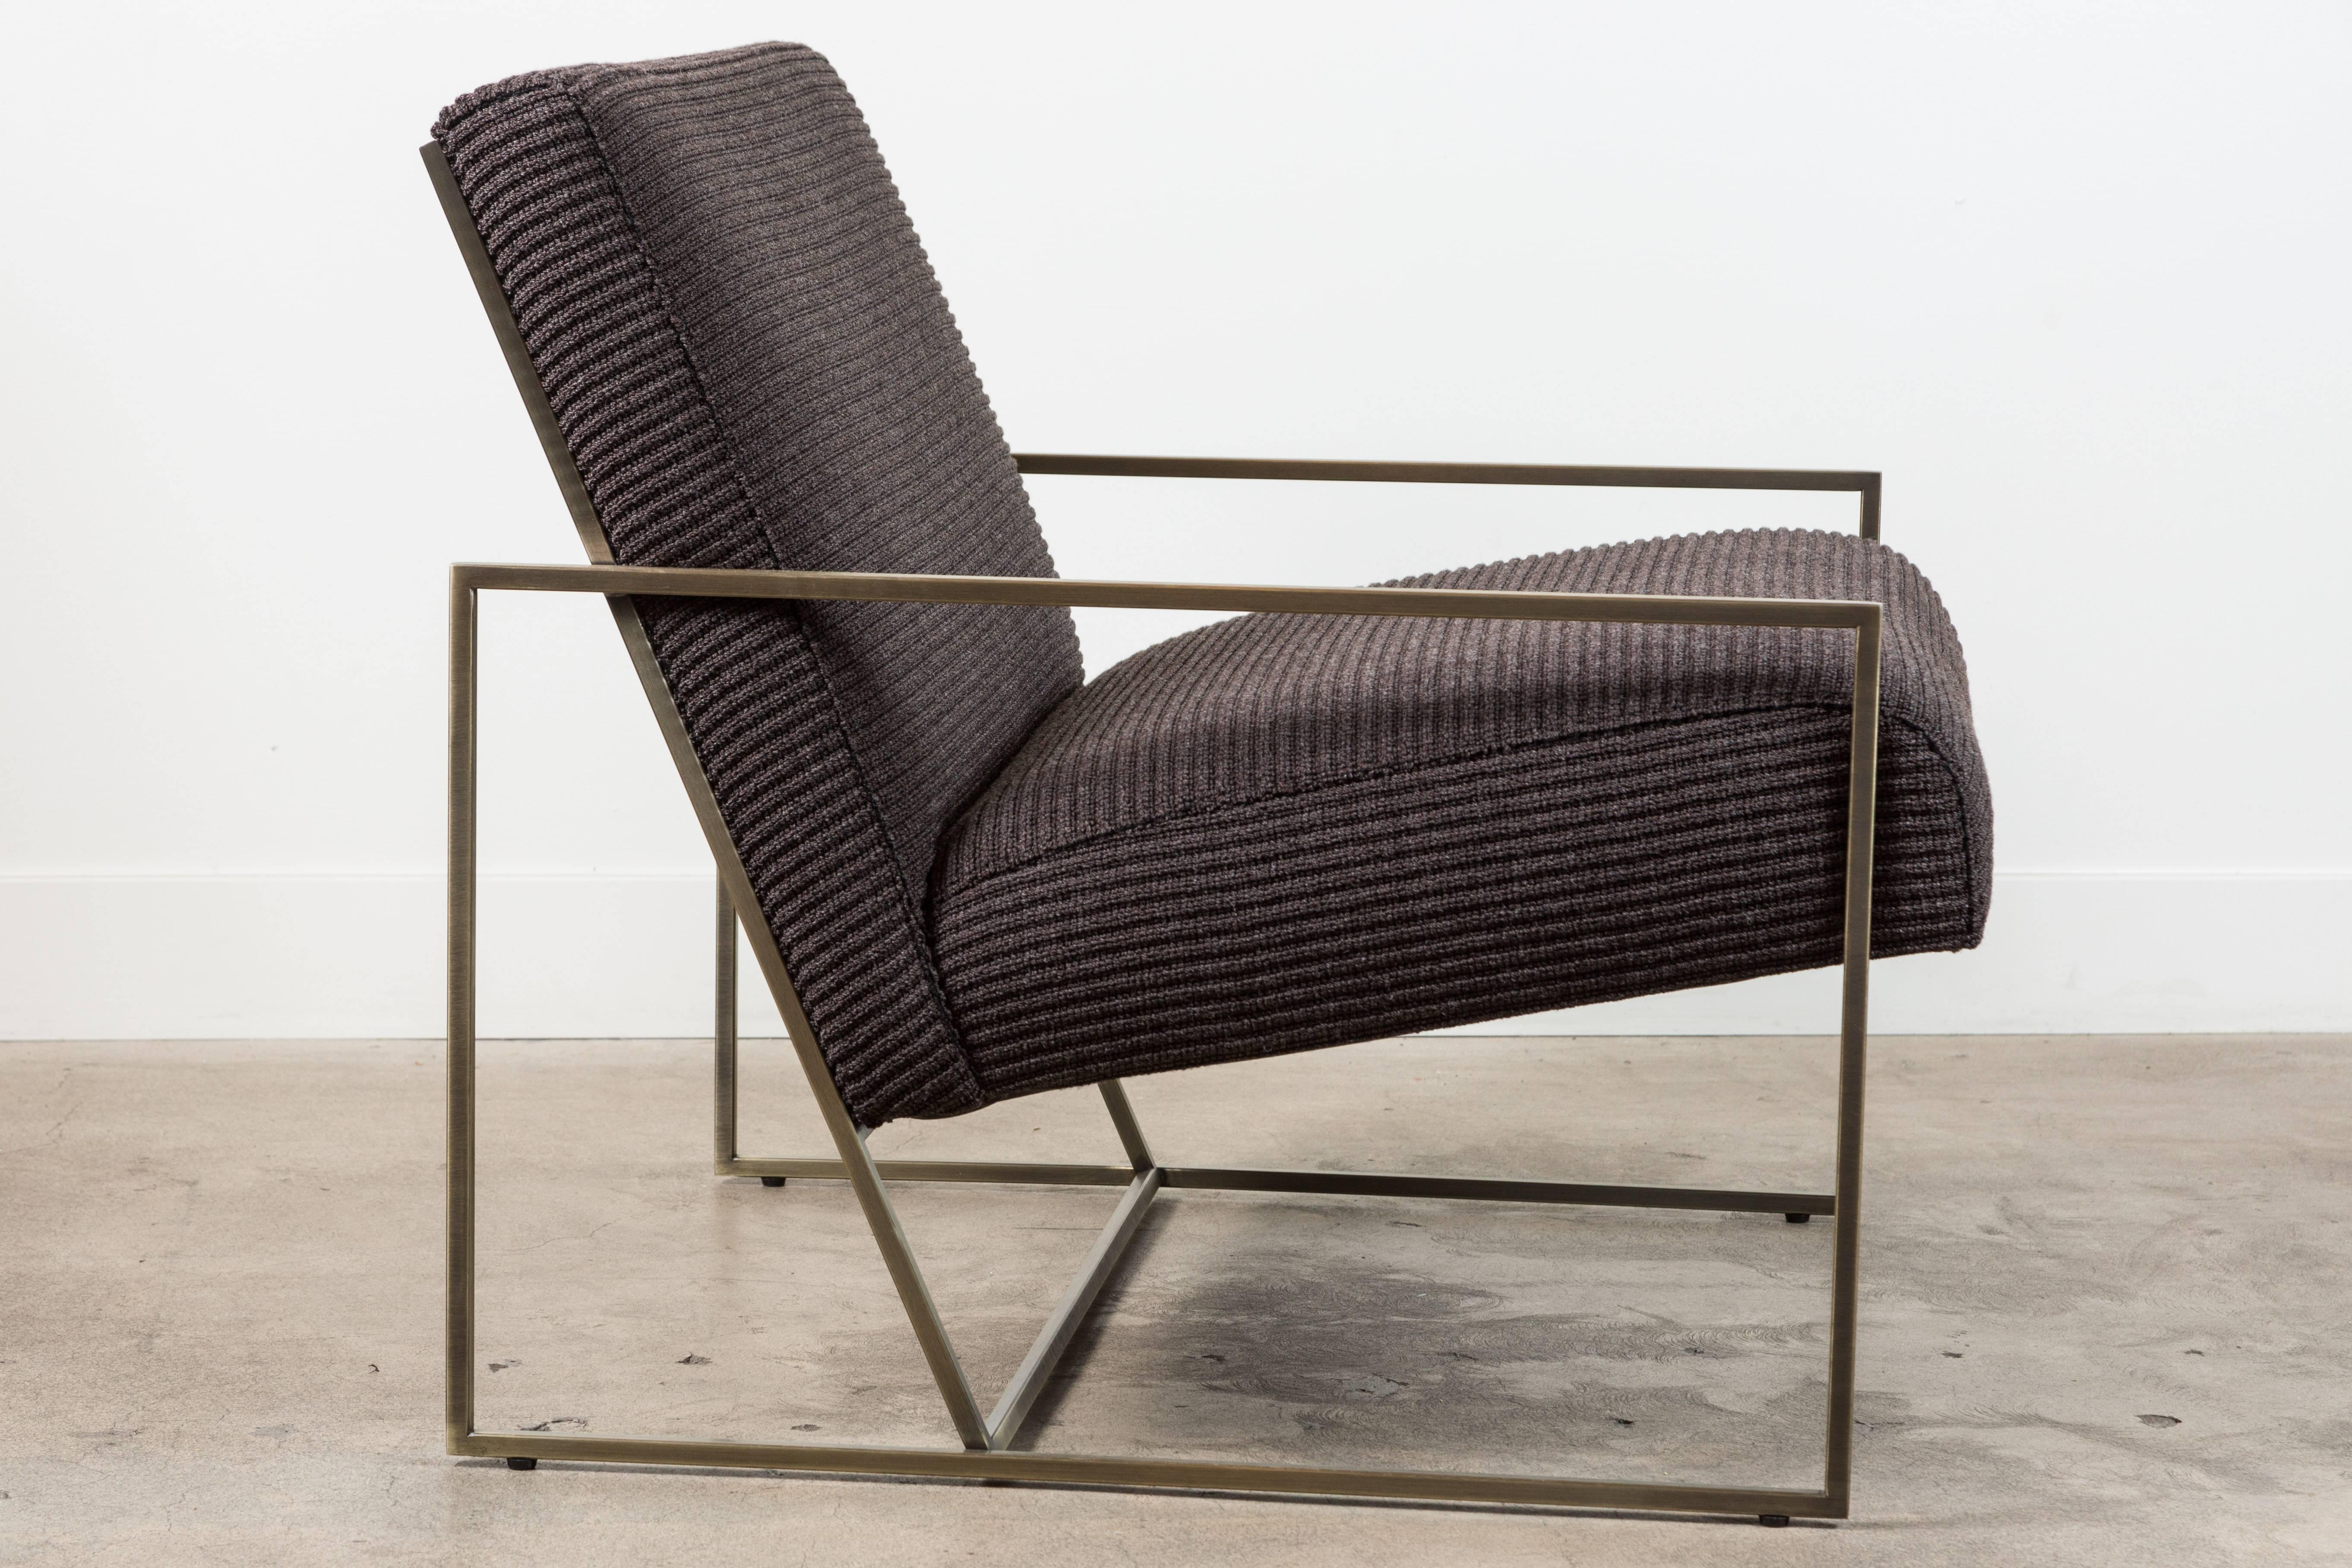 Thin frame lounge chair by Lawson-Fenning. 

Also available to order in customers own material with a 6-8 week lead time.

As shown: $2,190
To order: $1,750 + COM.